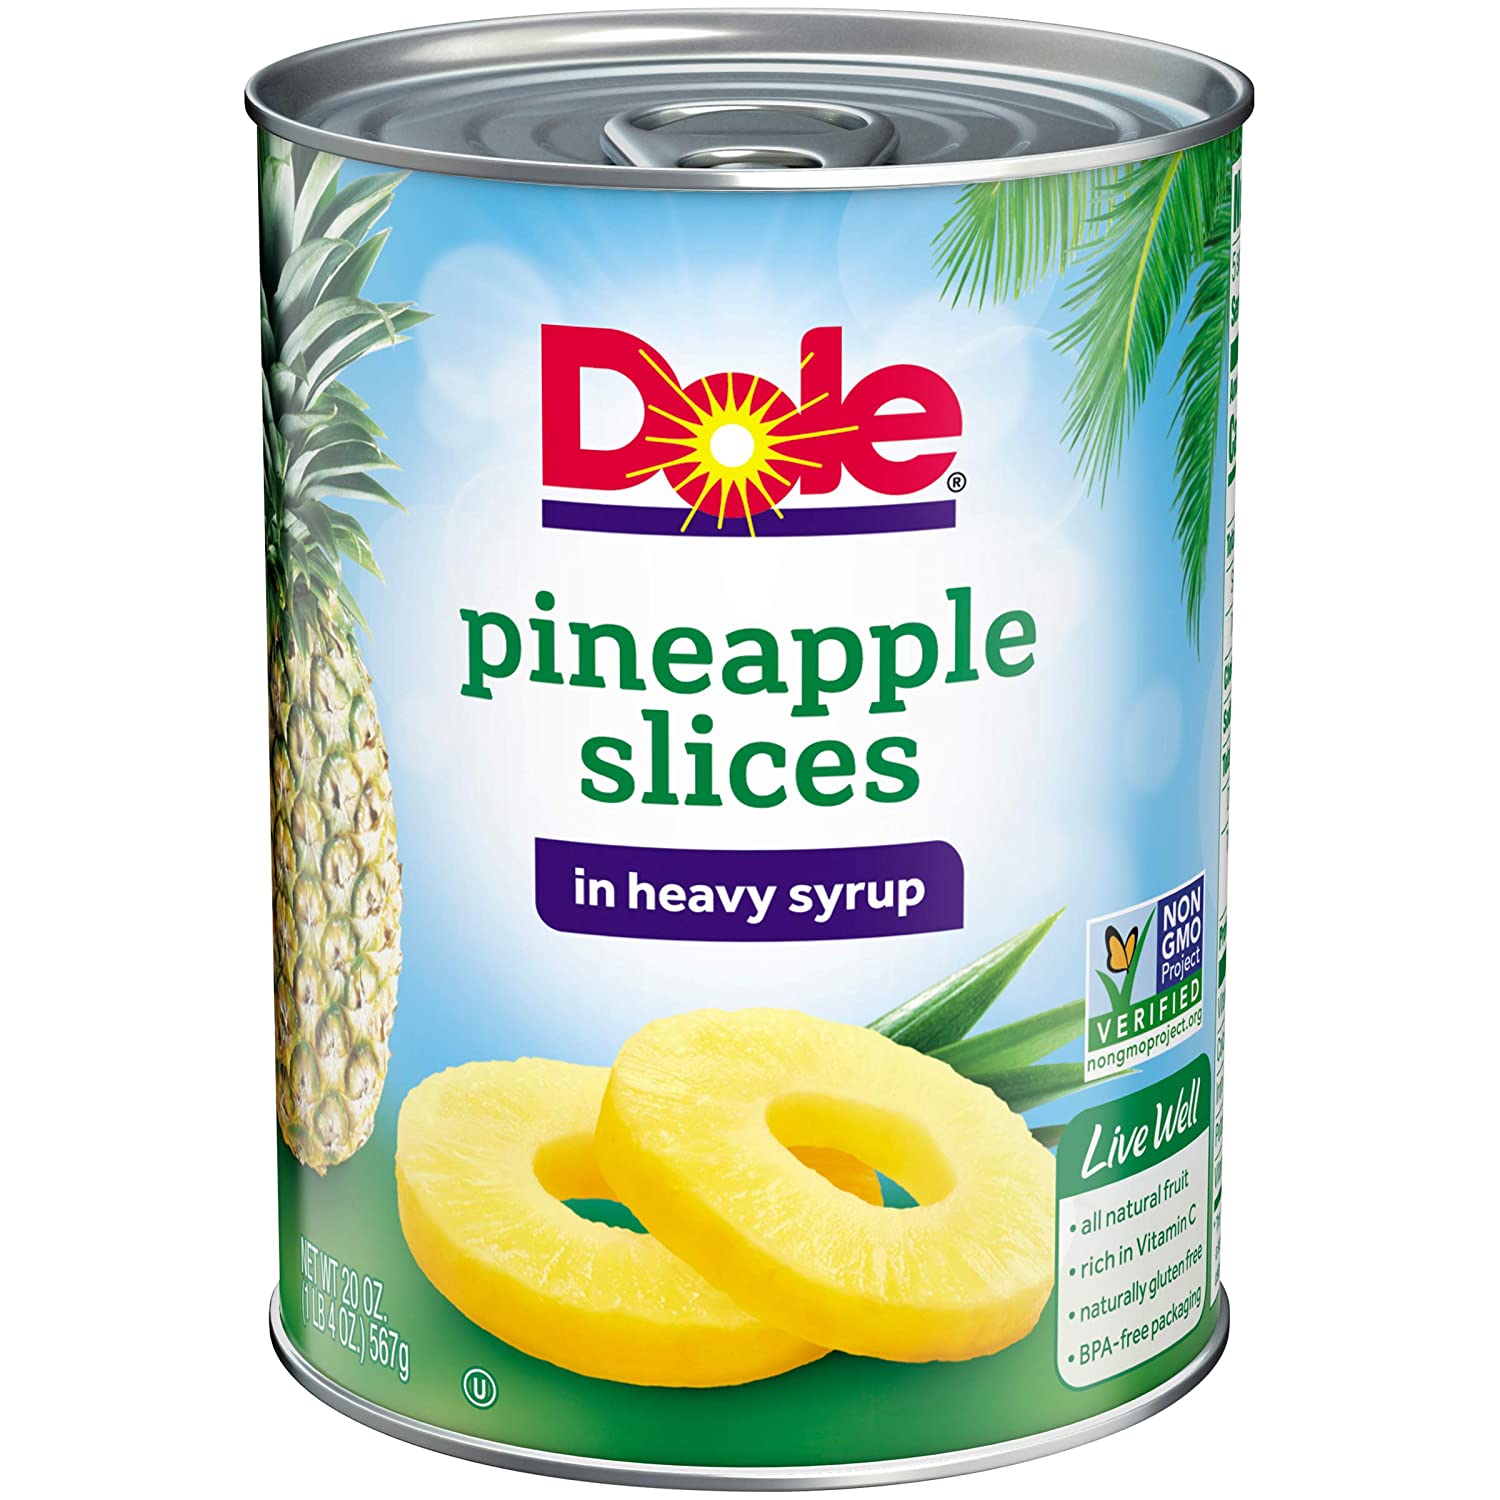 Dole Pineapple Slices in Heavy Syrup 567G